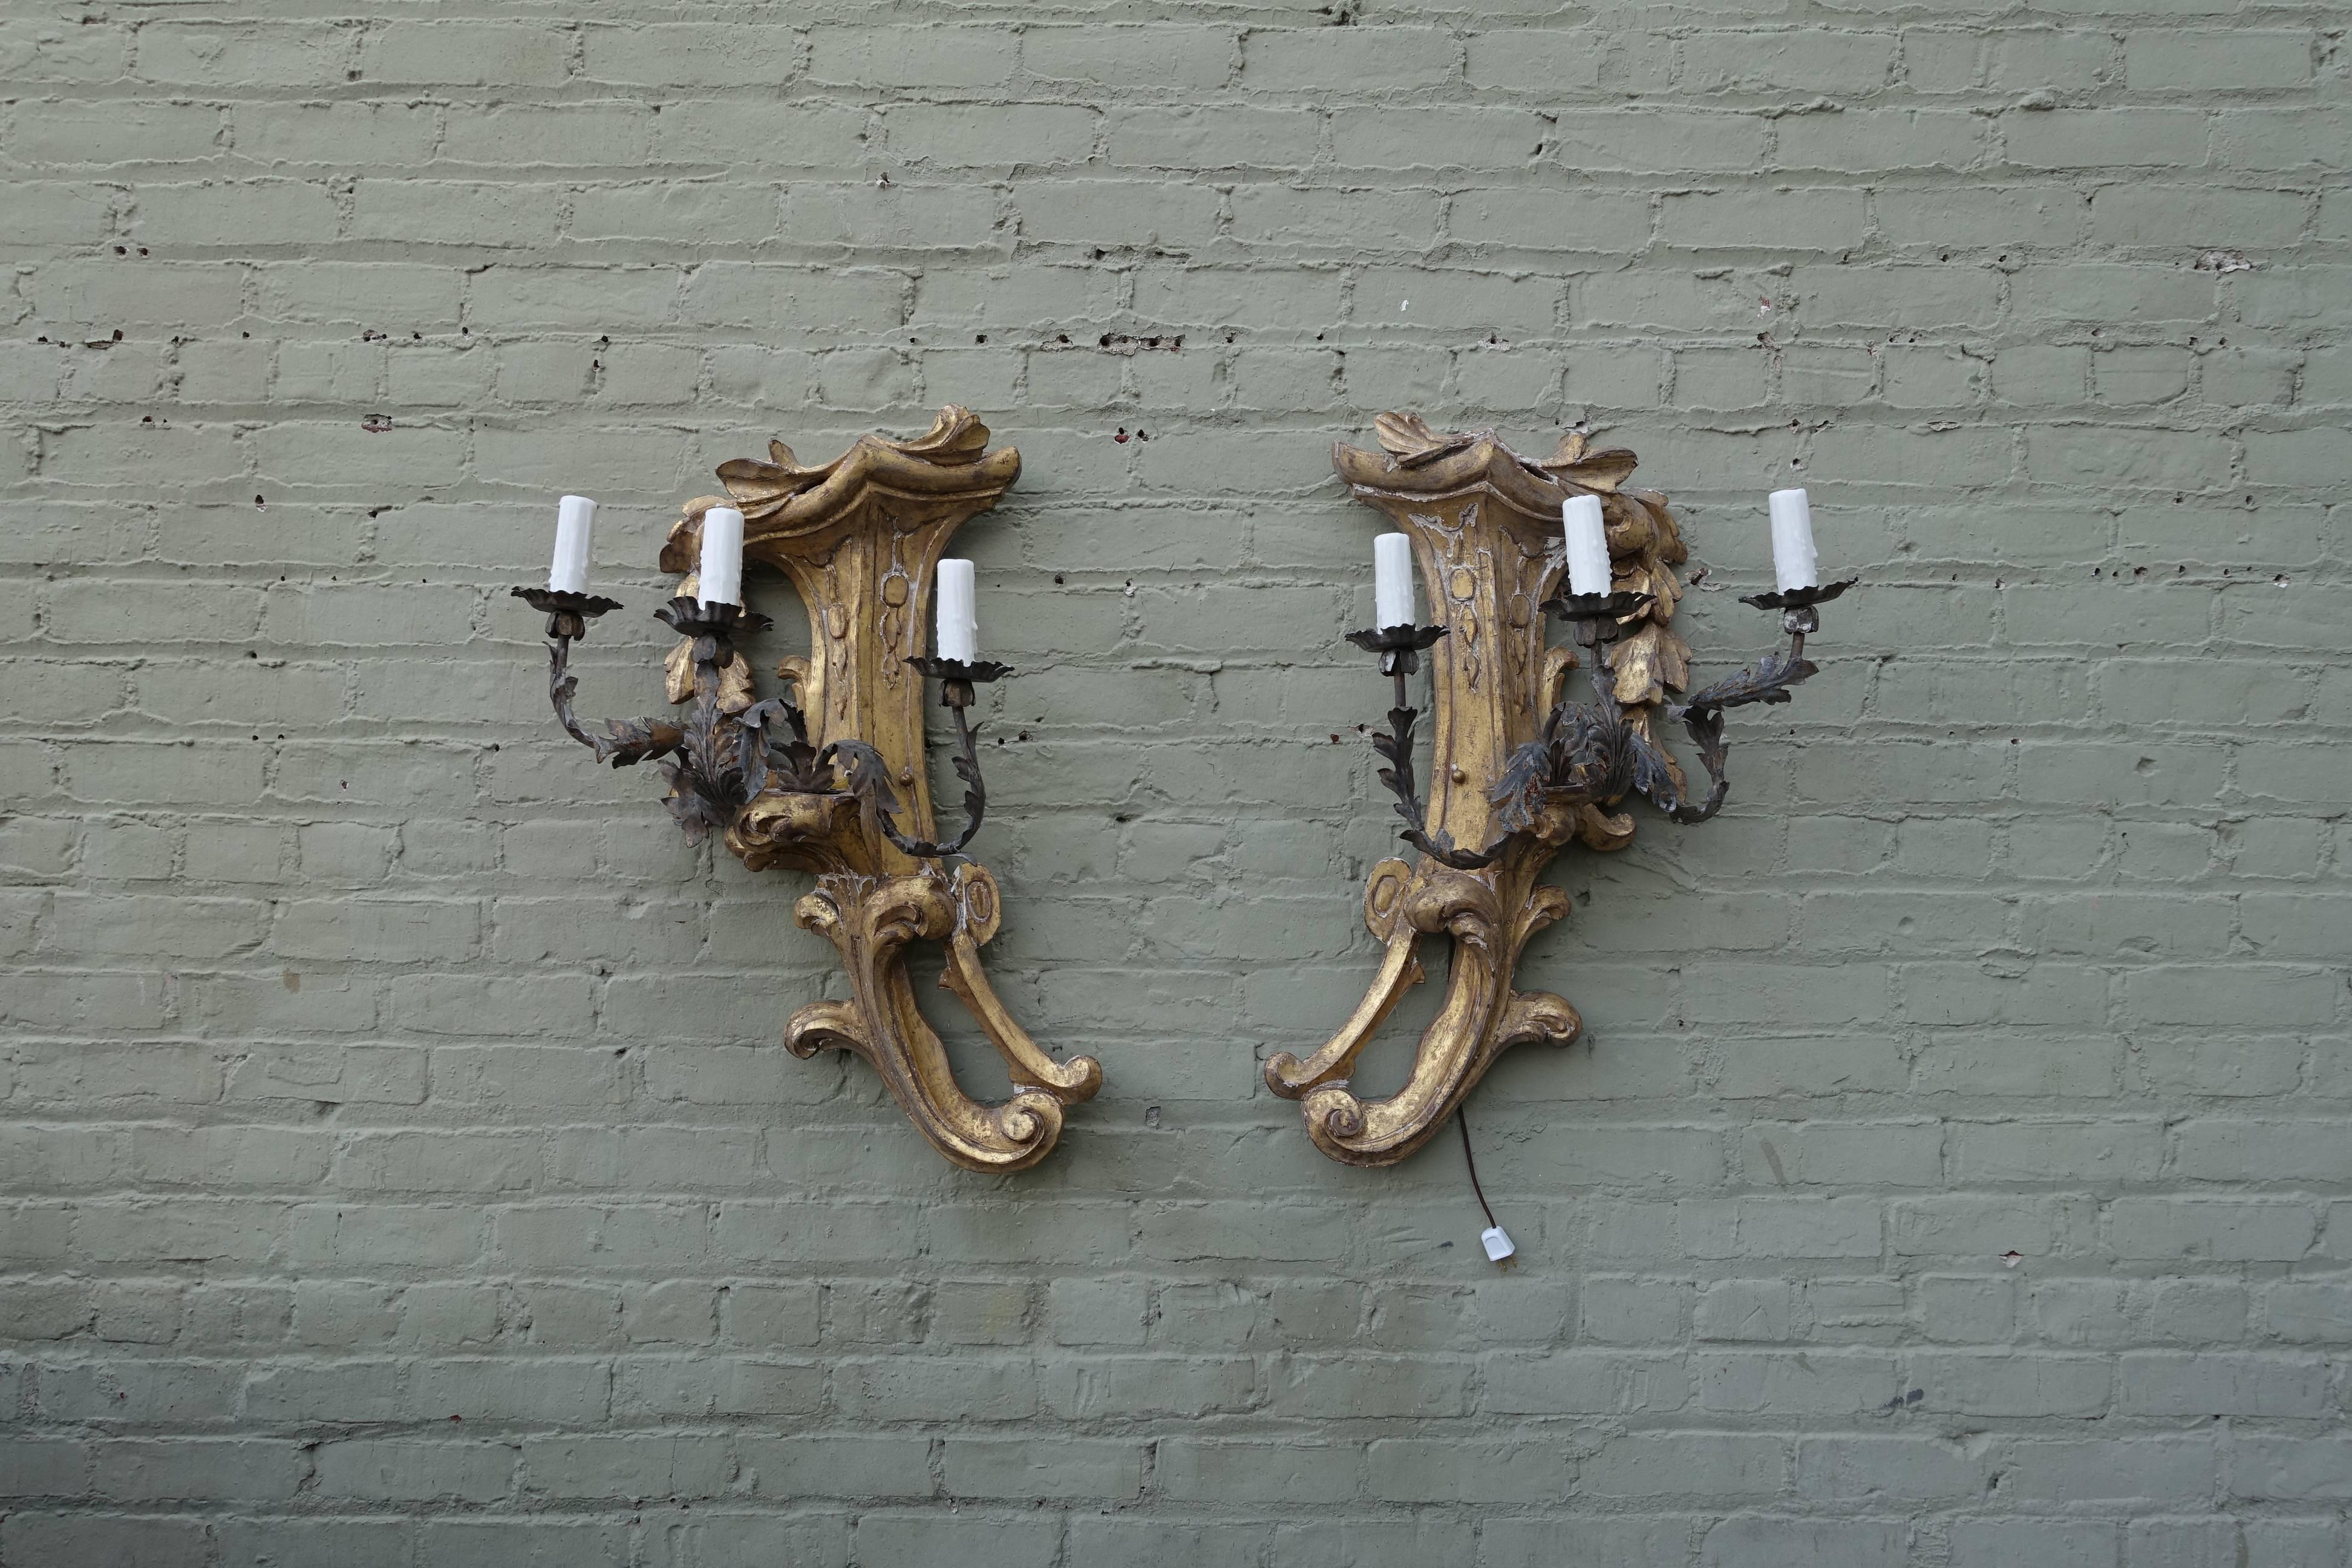 Pair of Italian three-light giltwood & wrought iron sconces. The sconces are newly wired with drip-wax candle covers. Ready to install.